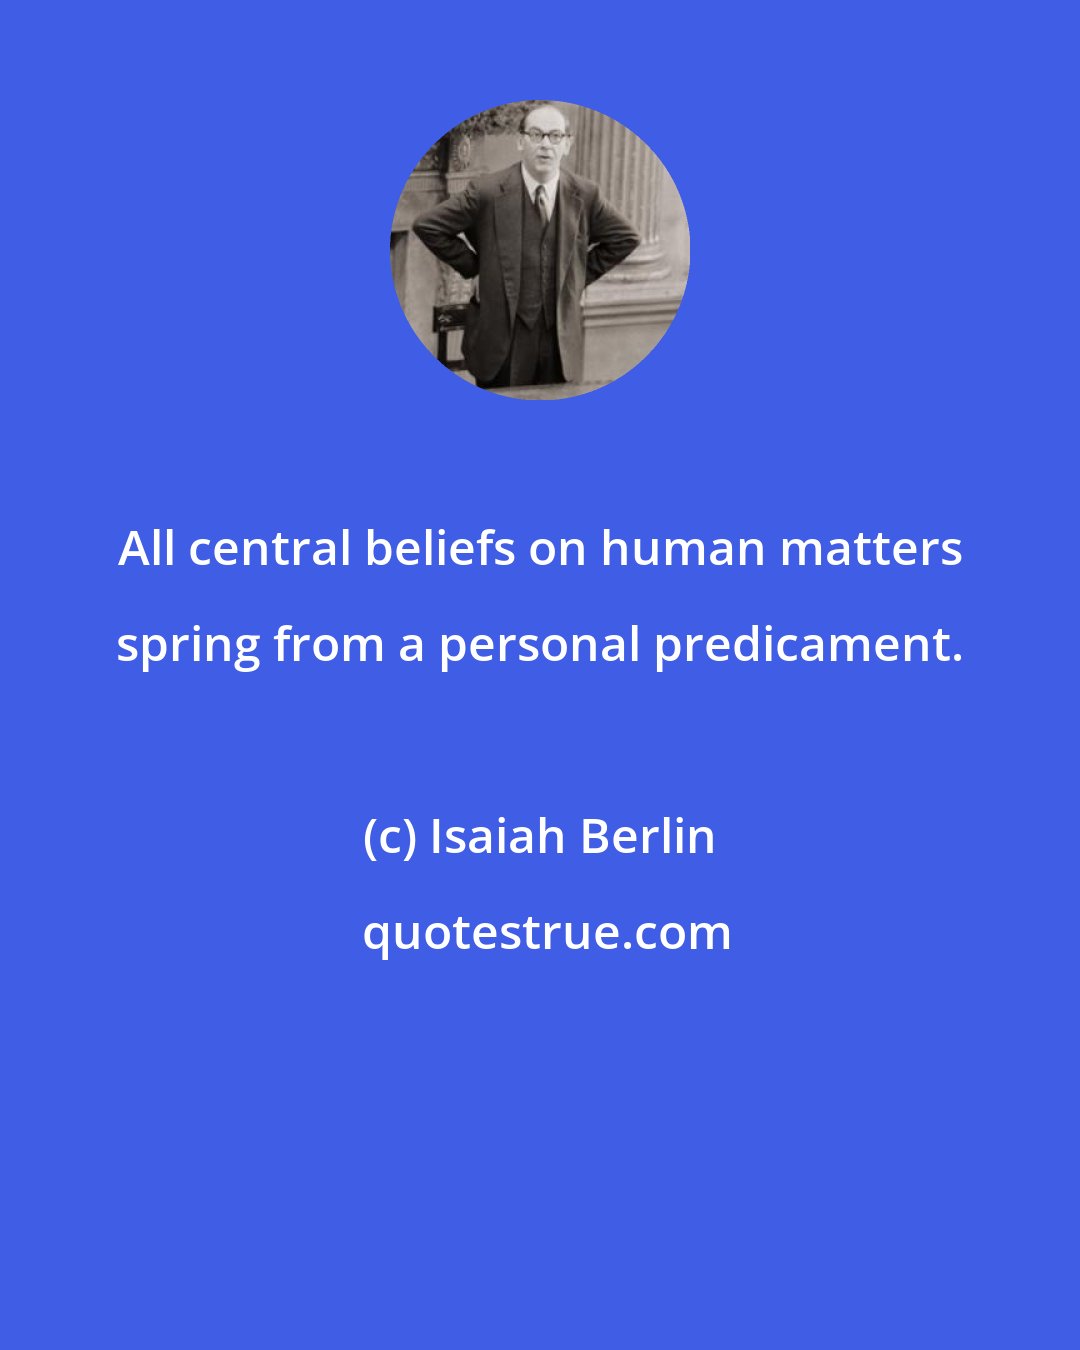 Isaiah Berlin: All central beliefs on human matters spring from a personal predicament.